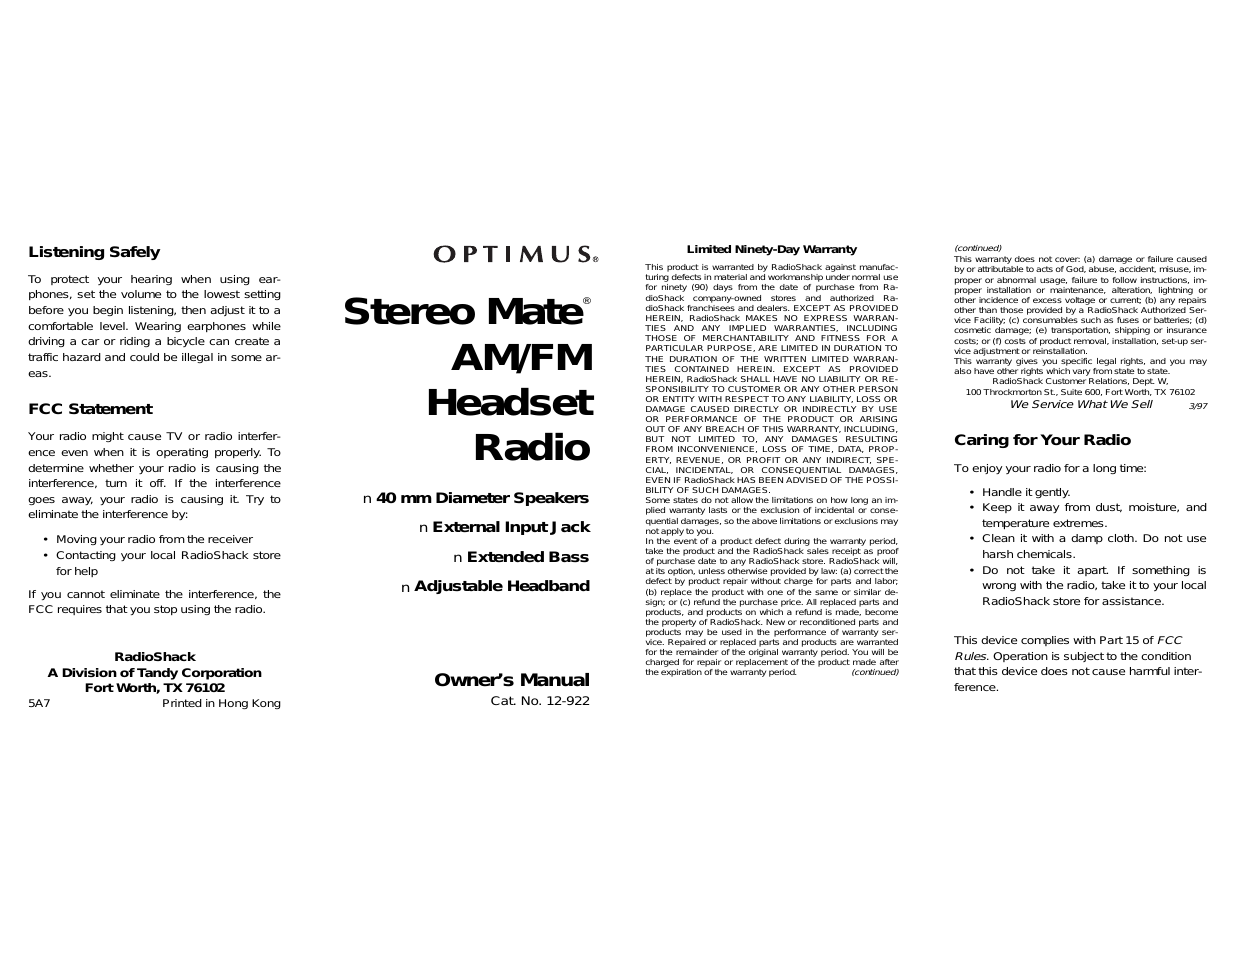 Stereo Mate 12-922